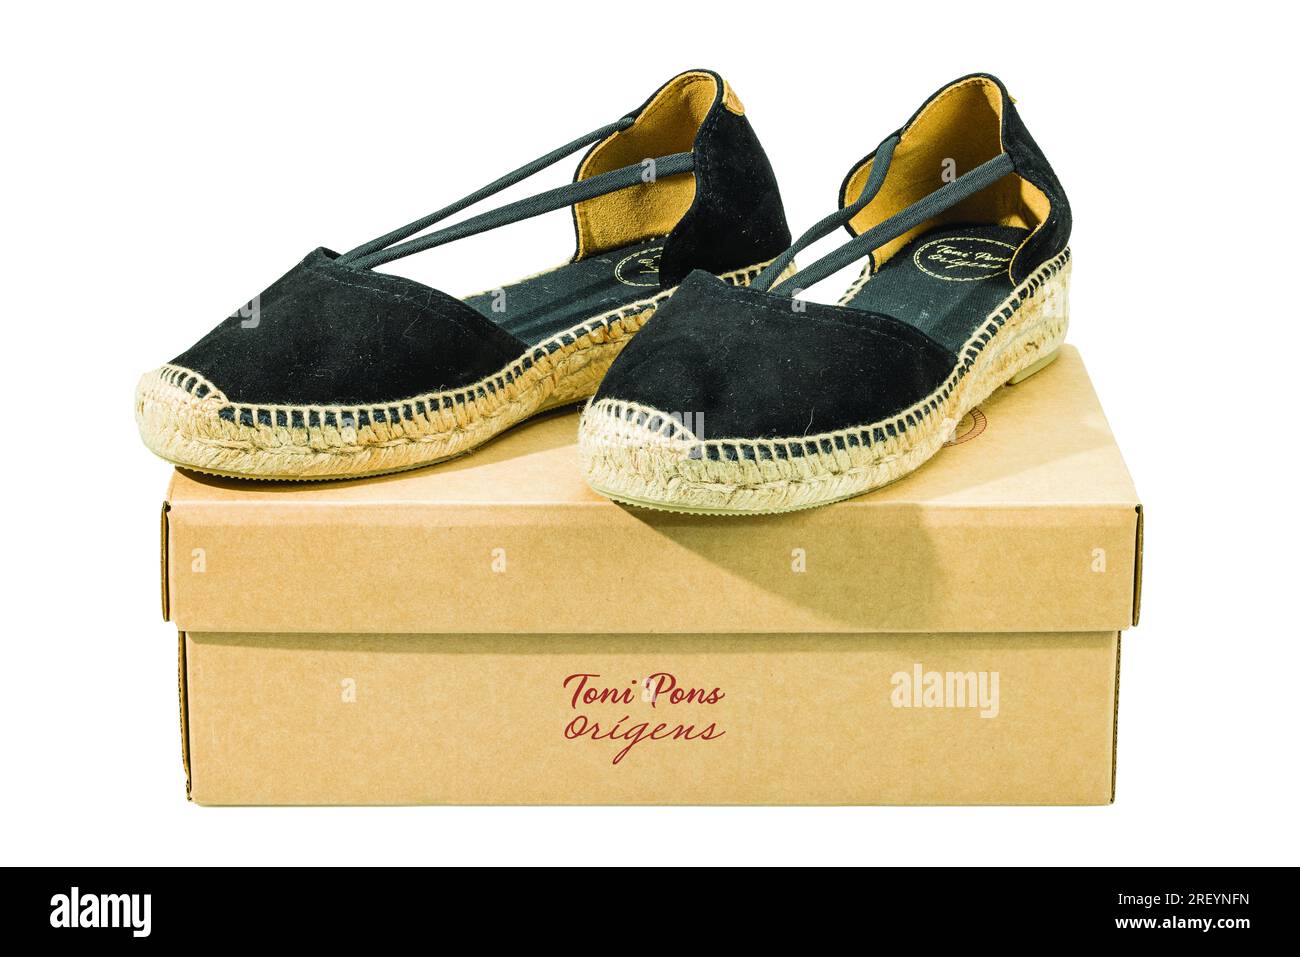 Close-up view of box with Toni Pons Origens black espadrilles sandals  isolated on white background. Sweden Stock Photo - Alamy